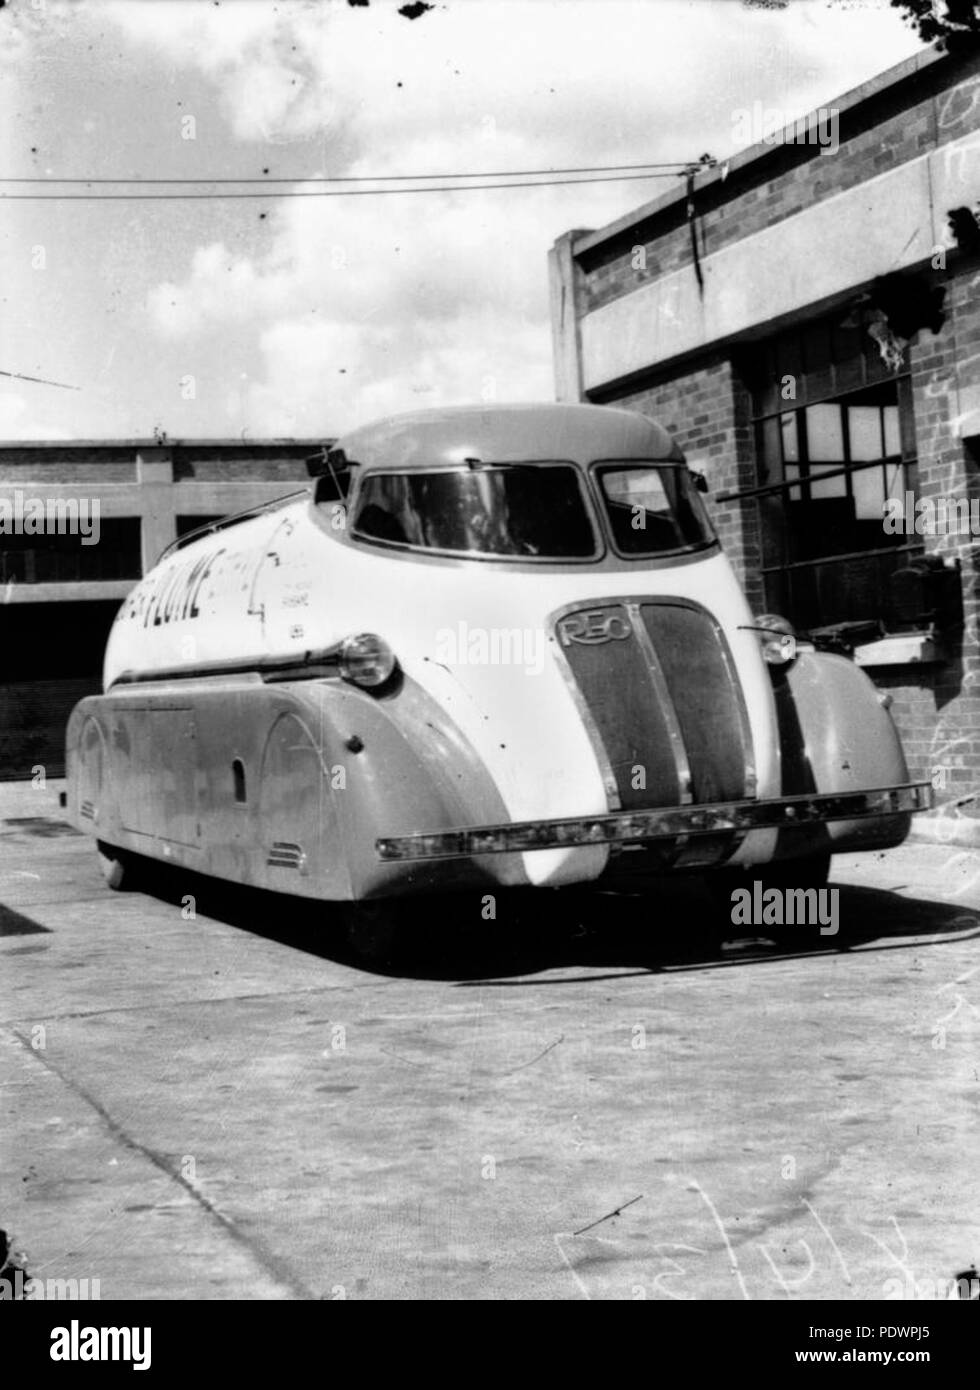 279 StateLibQld 2 104416 Plume petrol tanker using a Reo truck chassis Stock Photo